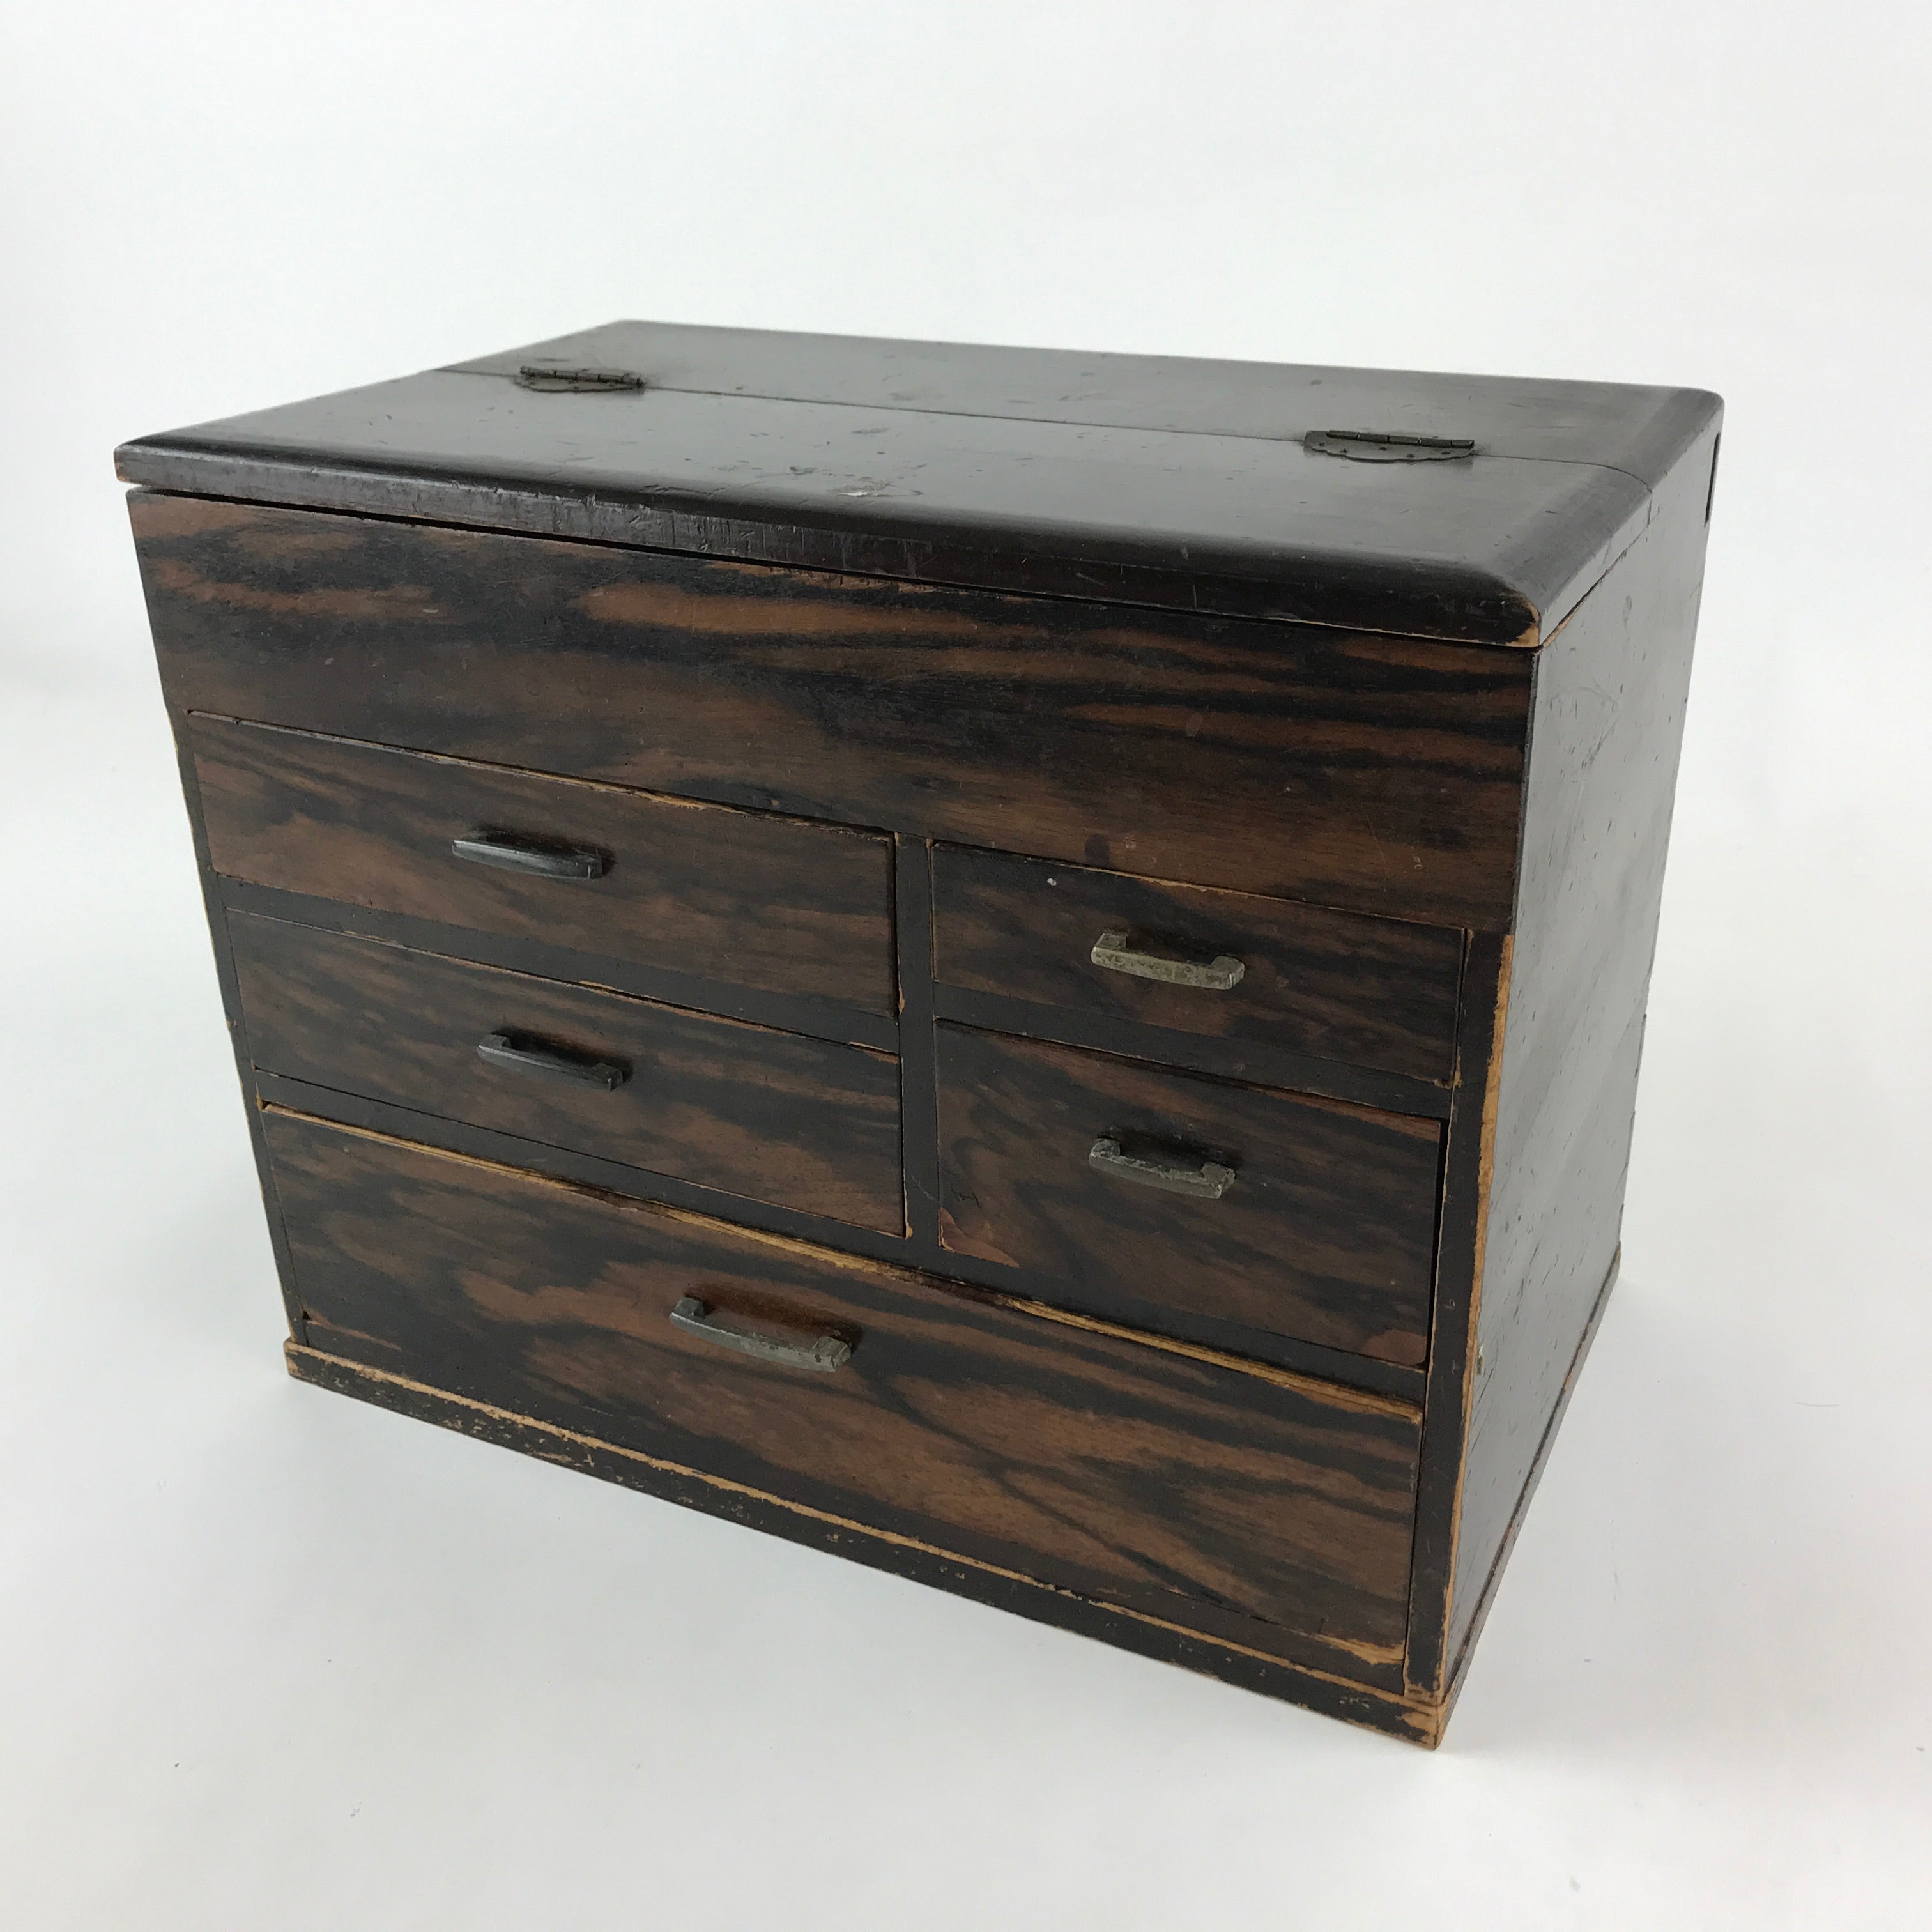 20th Century Japanese Wooden Tansu Cabinet